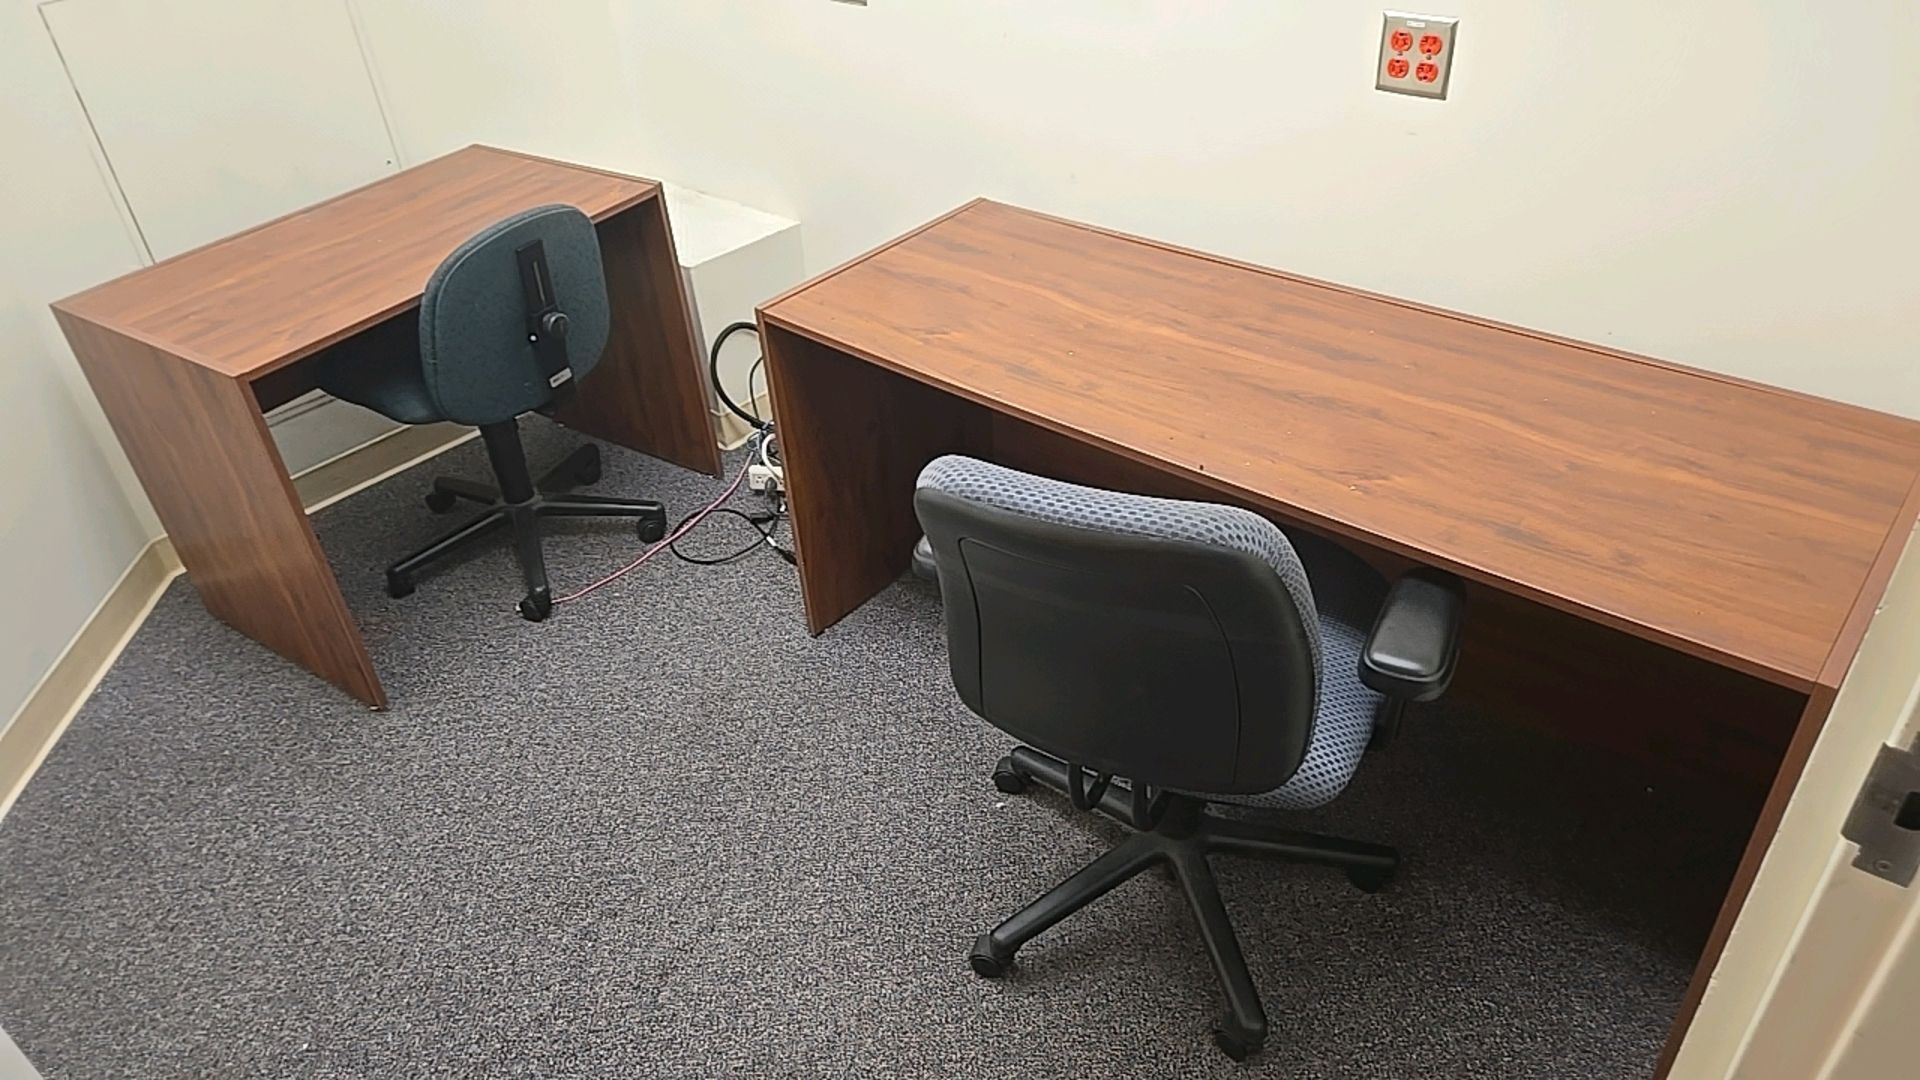 OFFICE TO INCLUDE: DESKS, CHAIRS